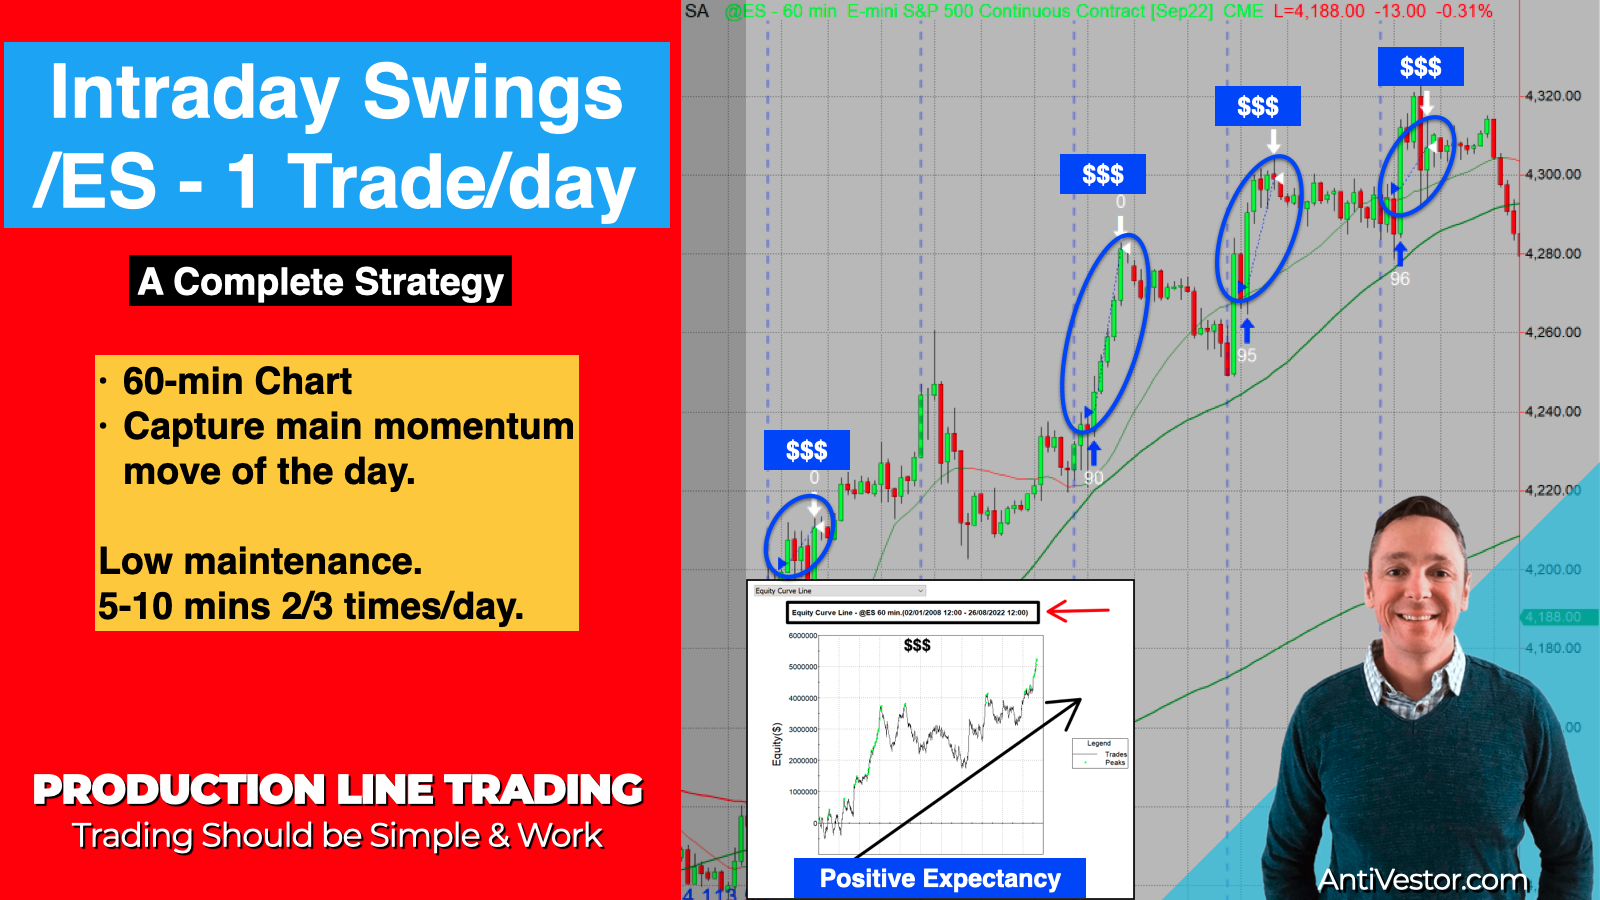 What Time Frame to Use When Day Trading - Trade That Swing